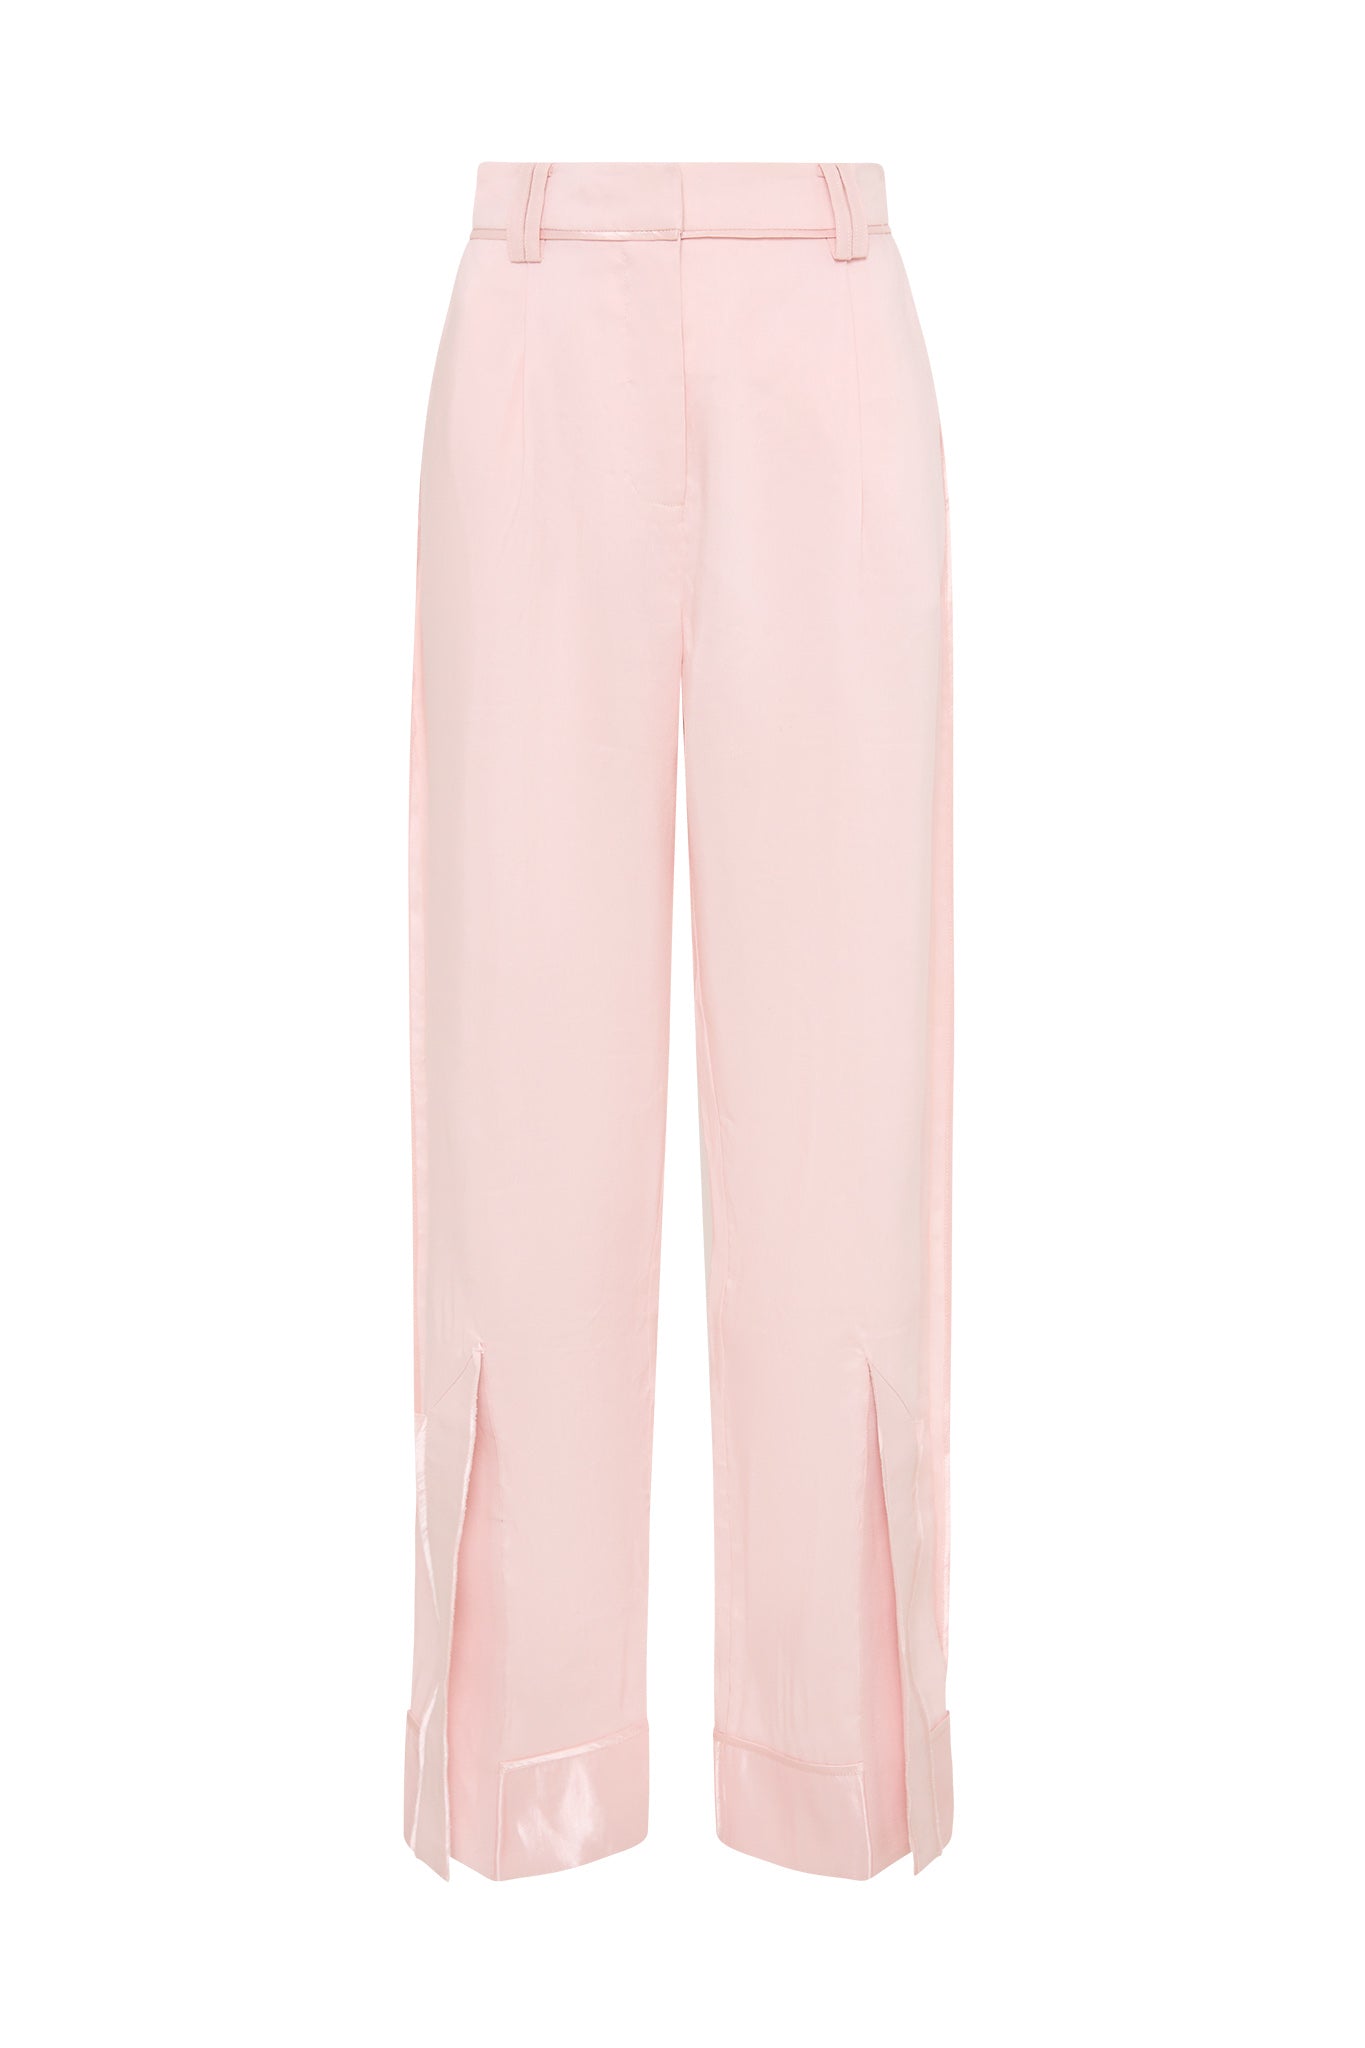 Insight Deconstructed Pant, Soft Pink